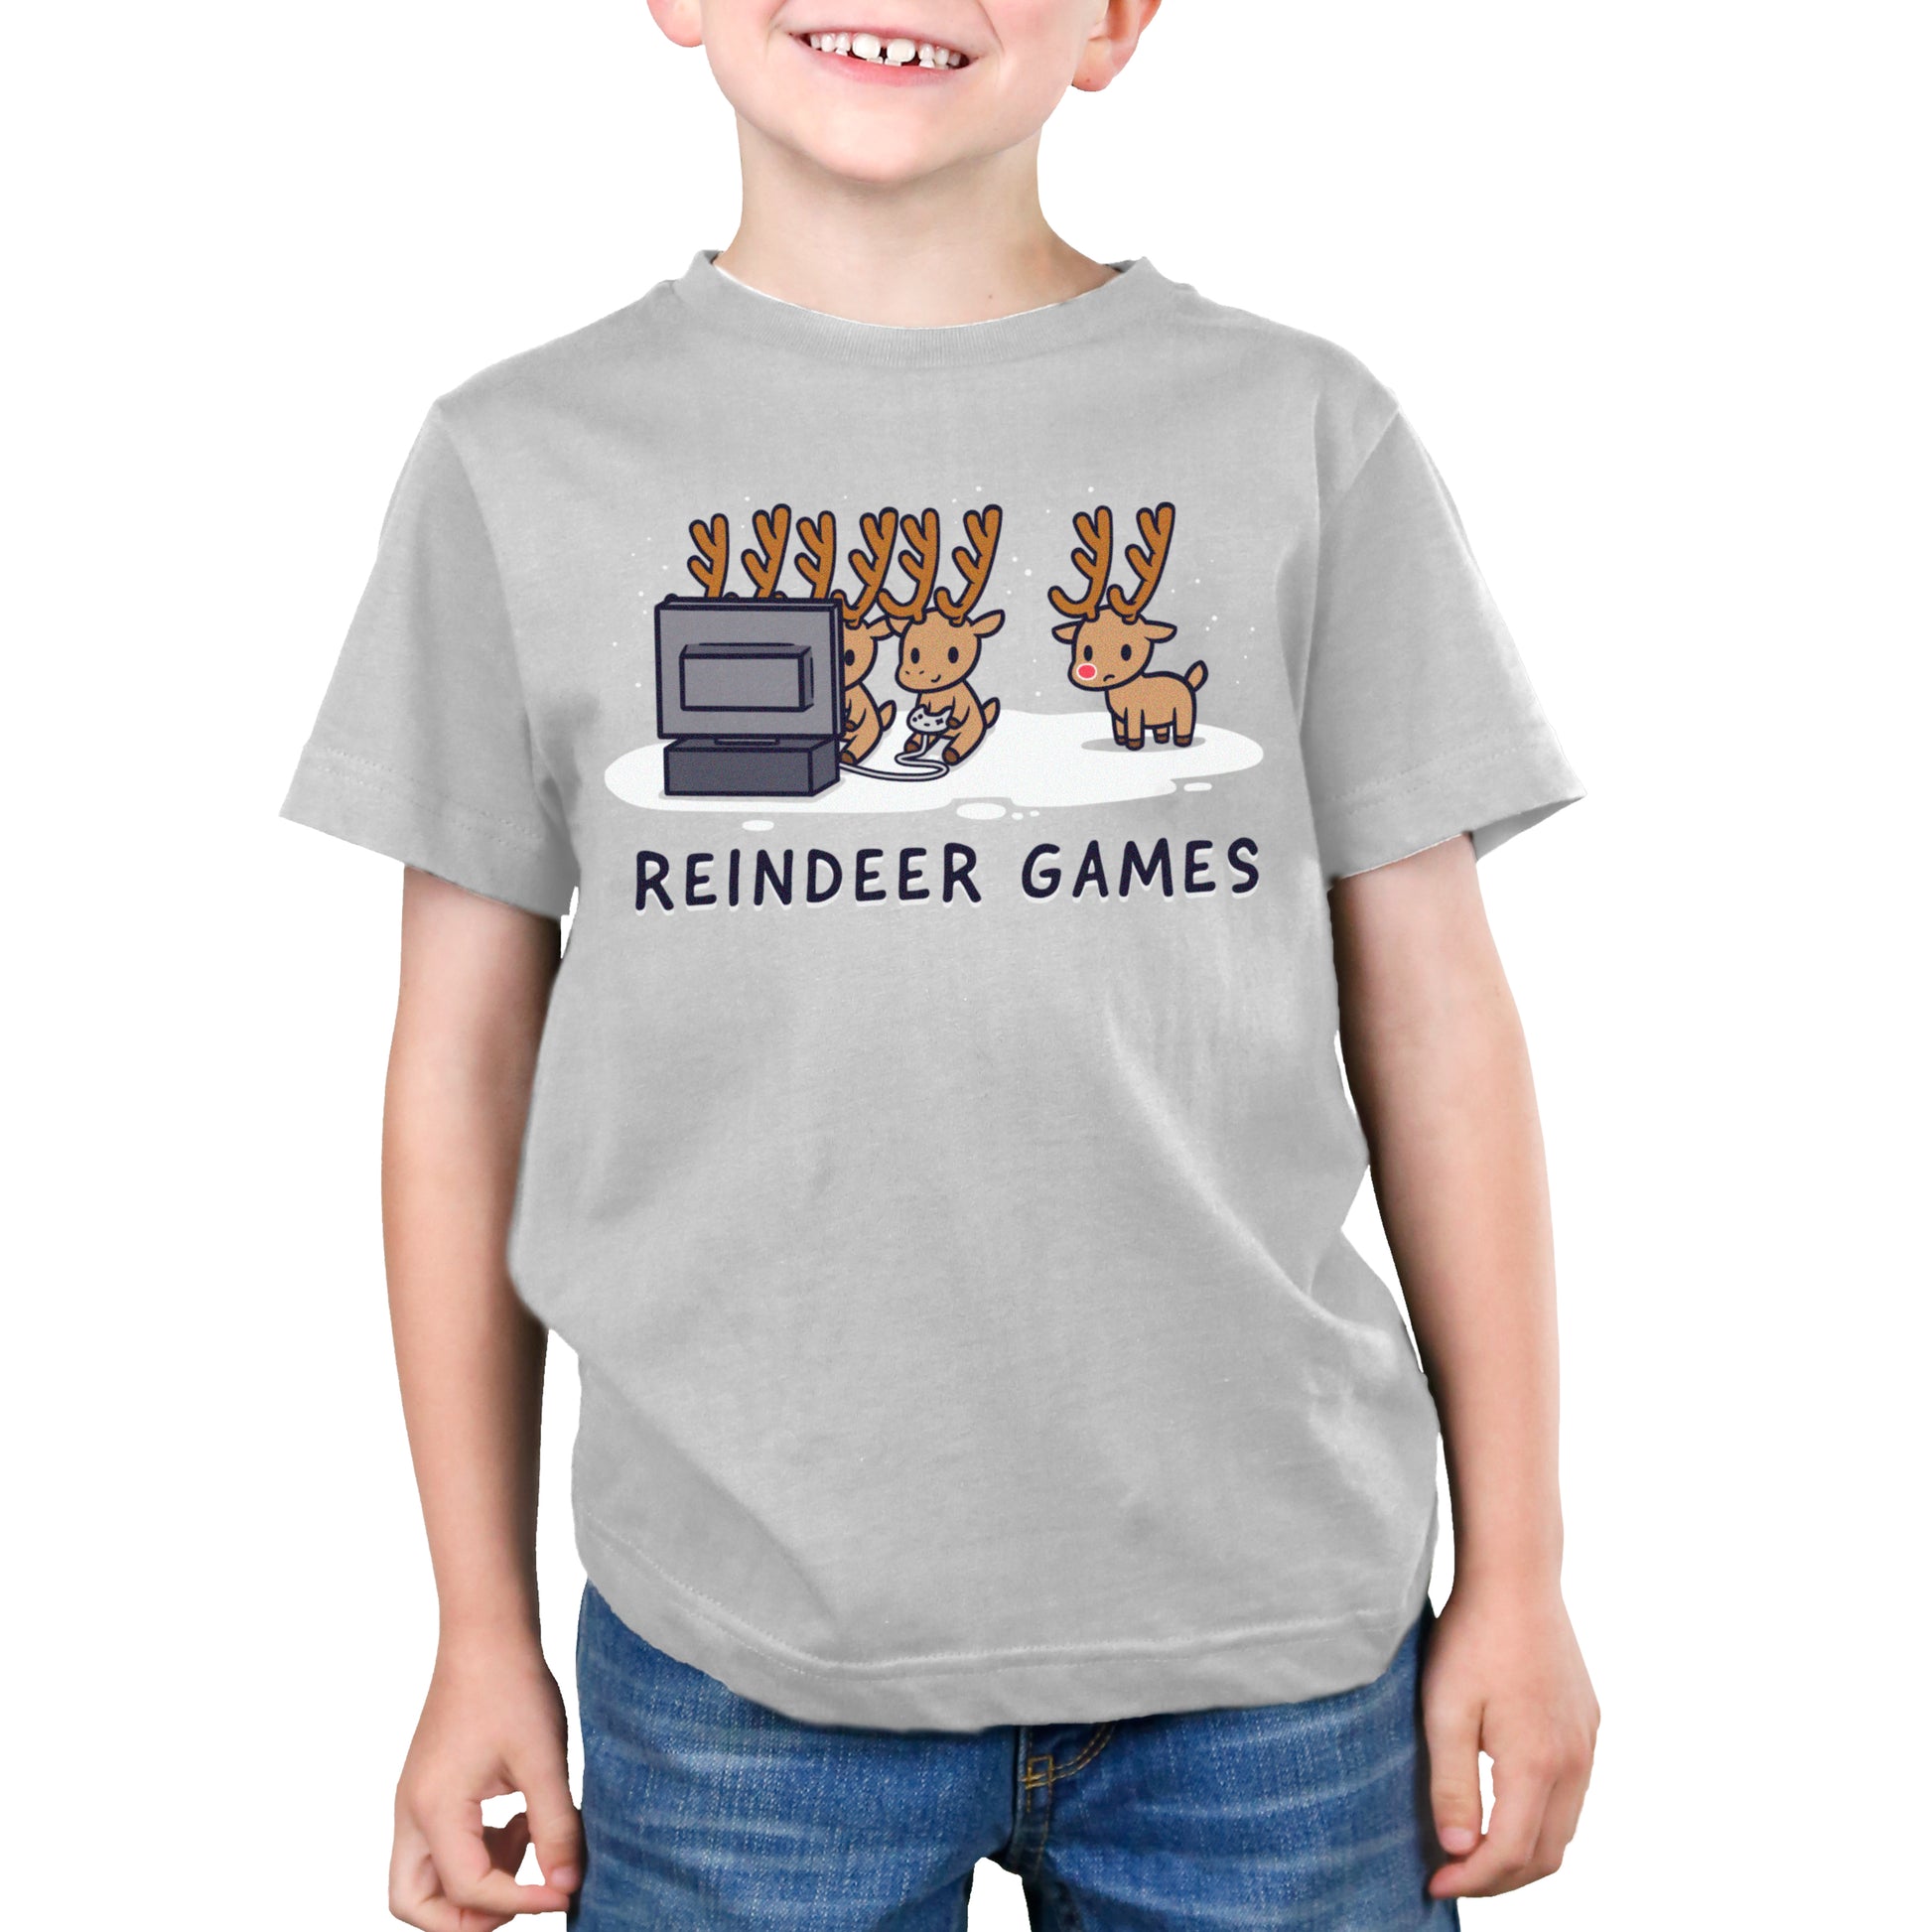 Silver Reindeer Games t-shirt for kids from TeeTurtle.